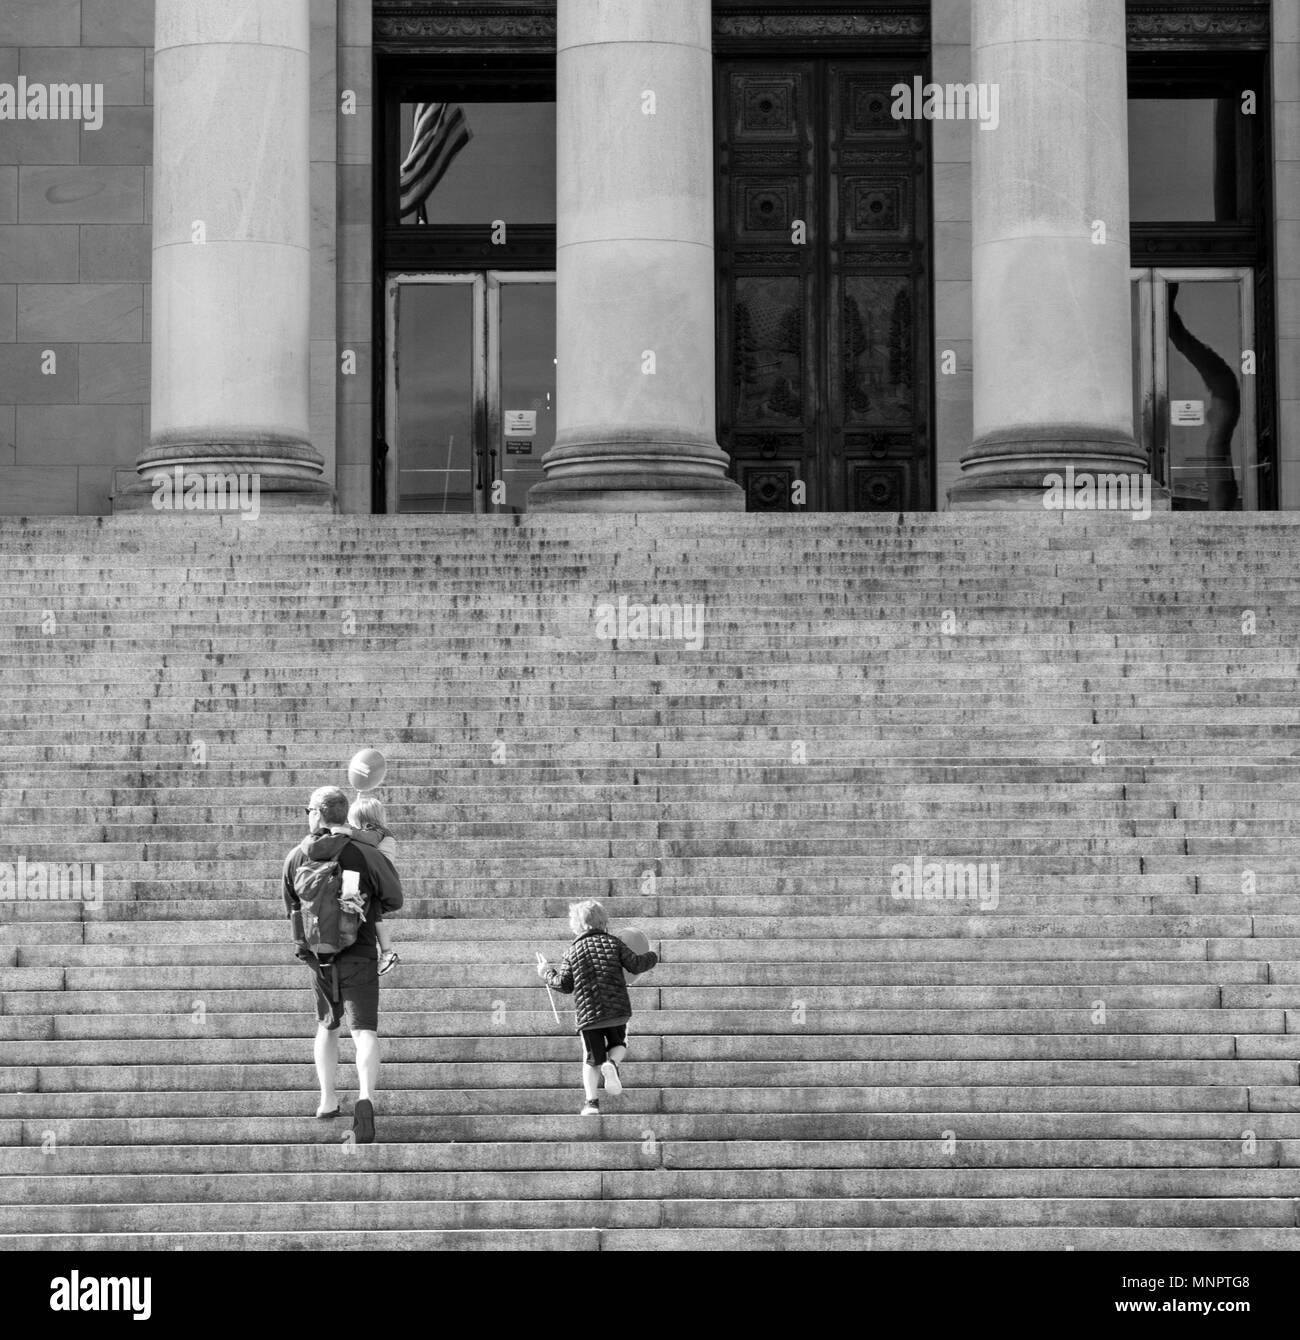 Olympia, Washington / USA - May 5, 2018: A father and his children walk up the steps of the Washington State Capitol building carrying balloons on a b Stock Photo